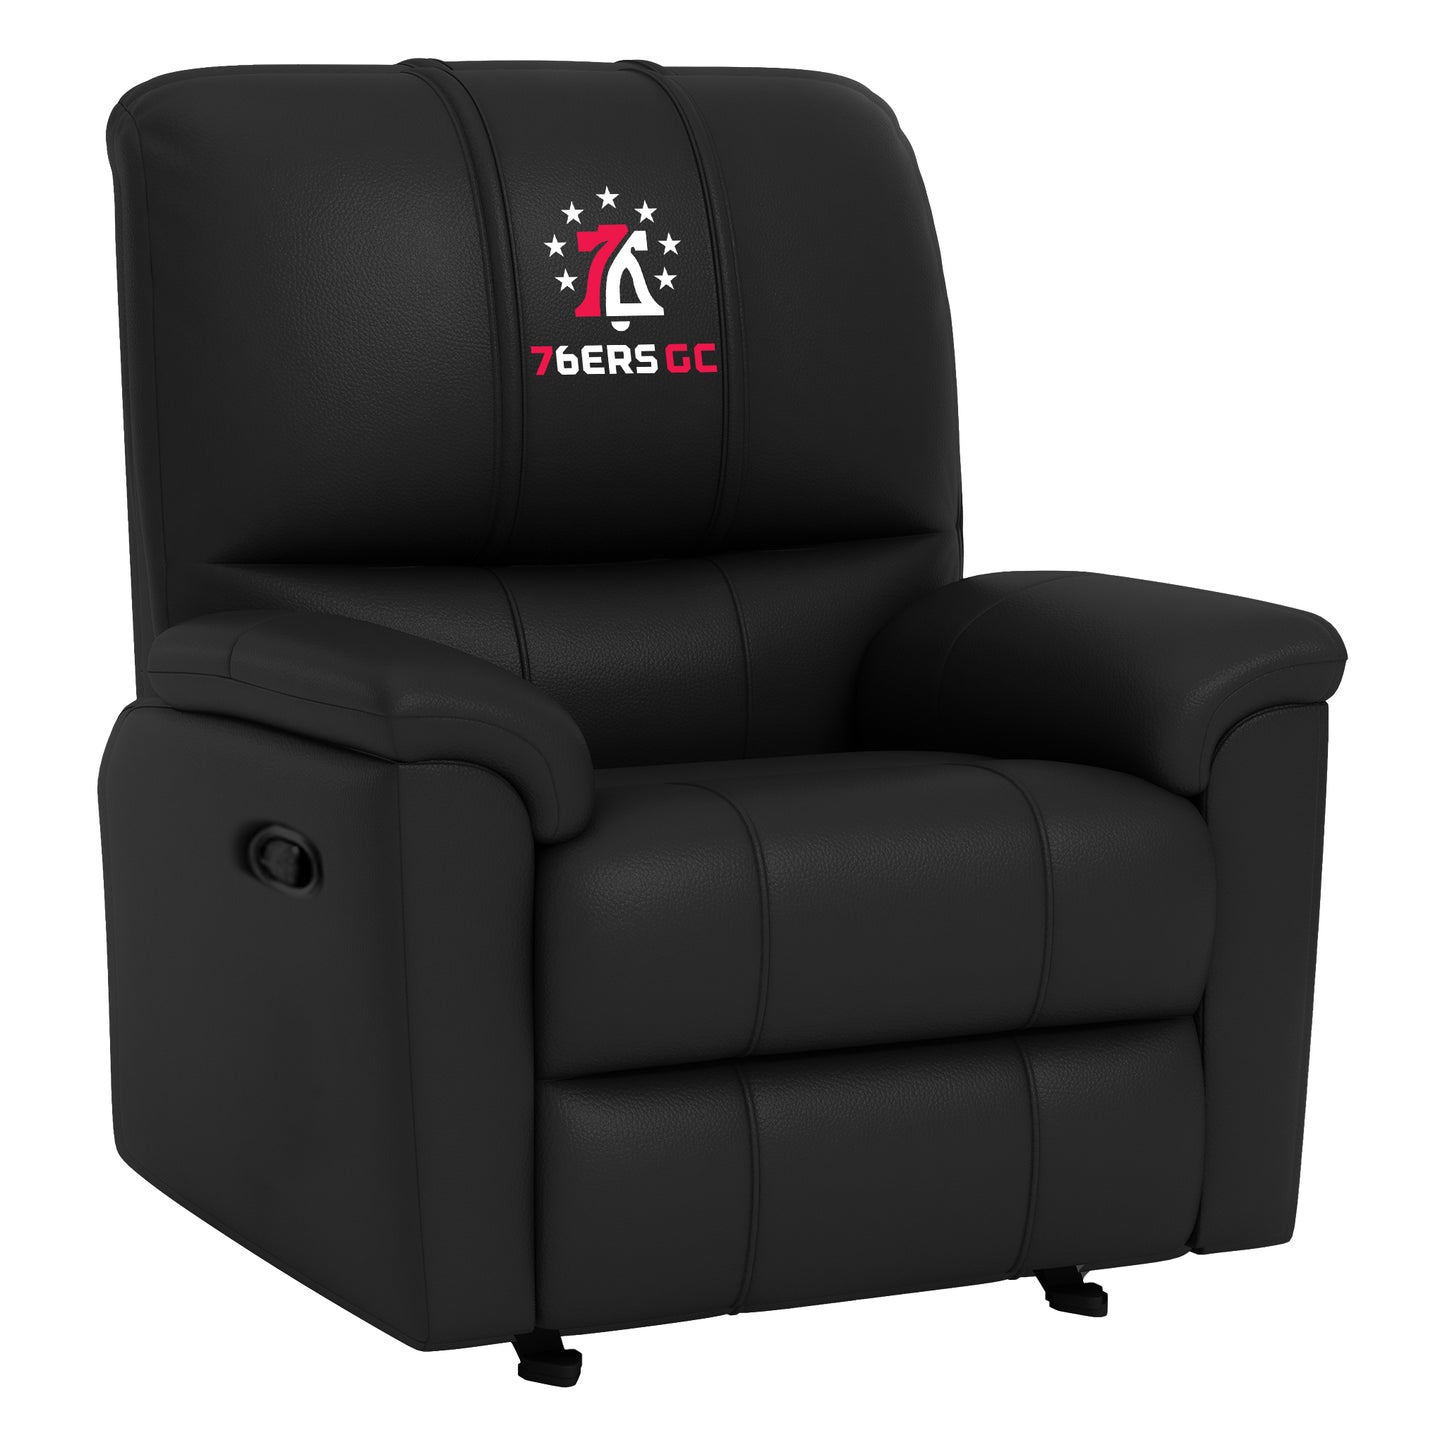 Rocker Recliner with Philadelphia 76ers GC [CAN ONLY BE SHIPPED TO PENNSYLVANIA]